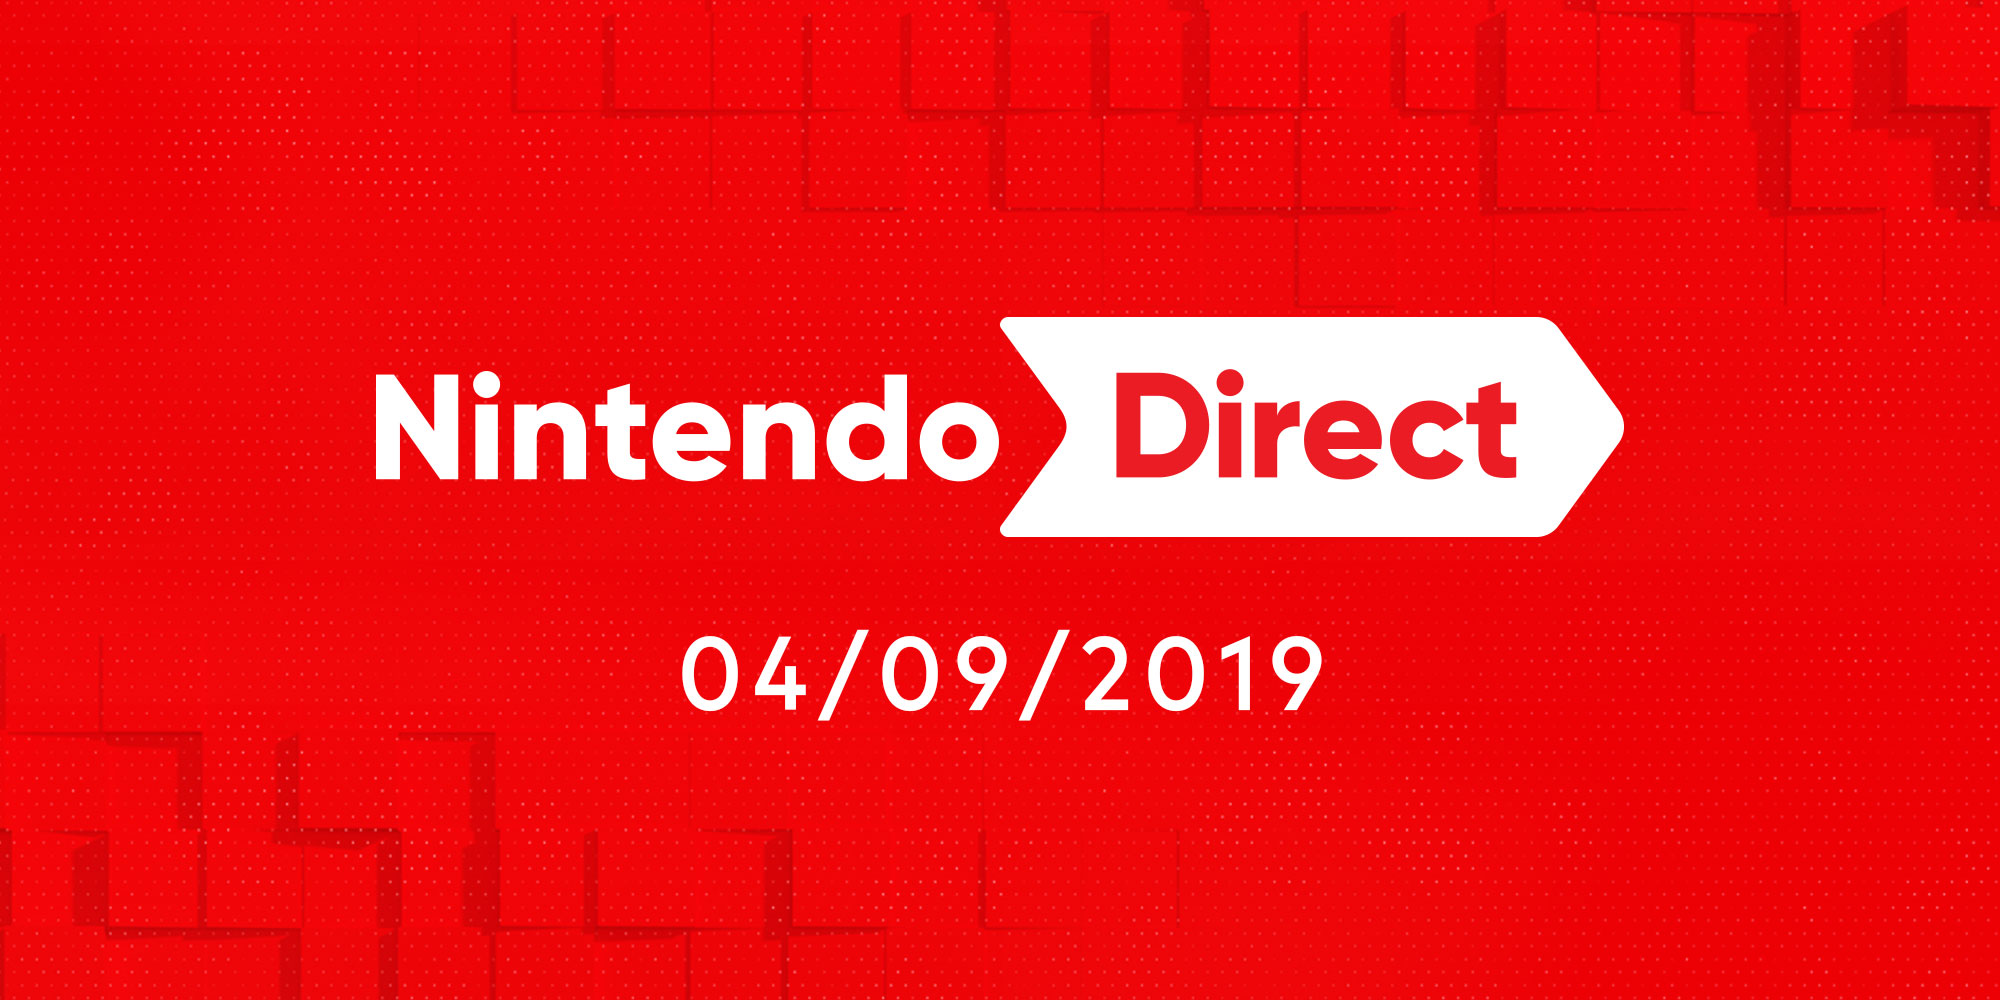 New Nintendo Direct presentation airs this Wednesday at 11pm UK time